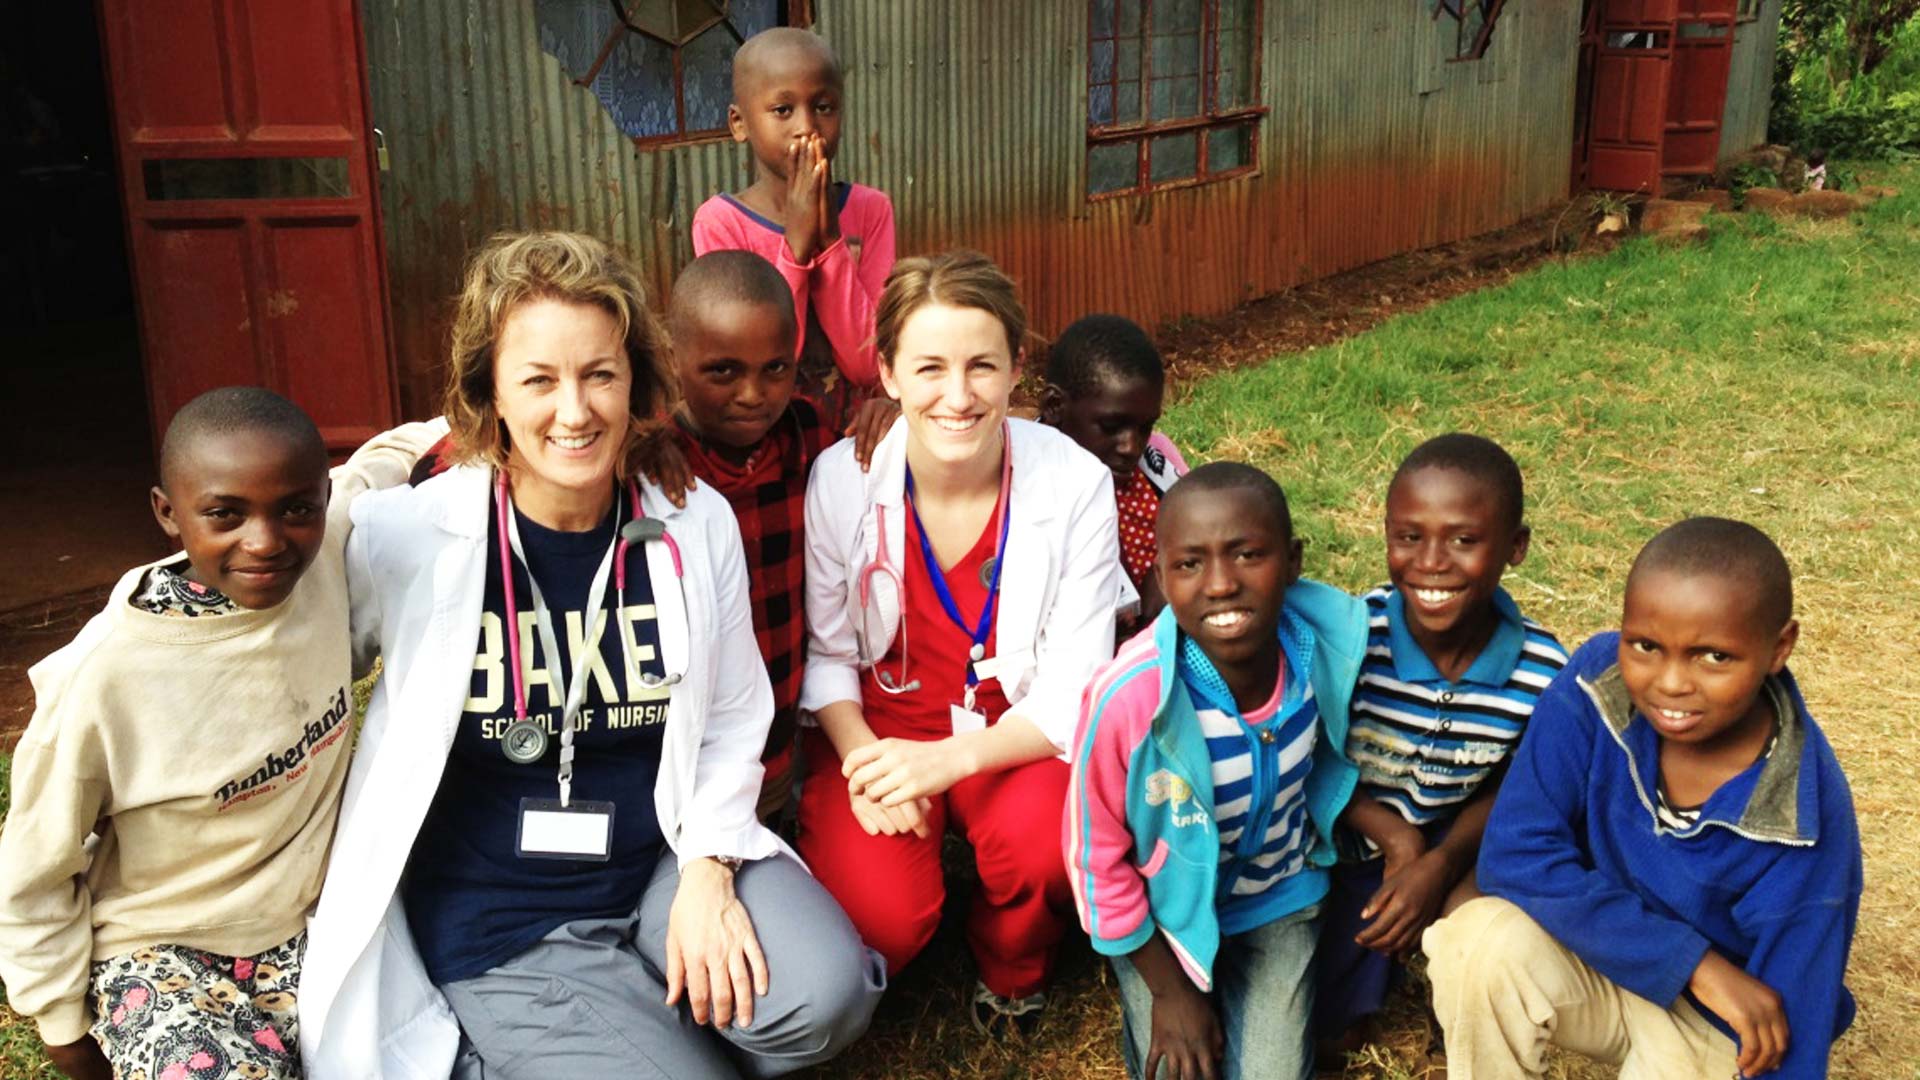 School of Nursing individuals posing with children on mission trip